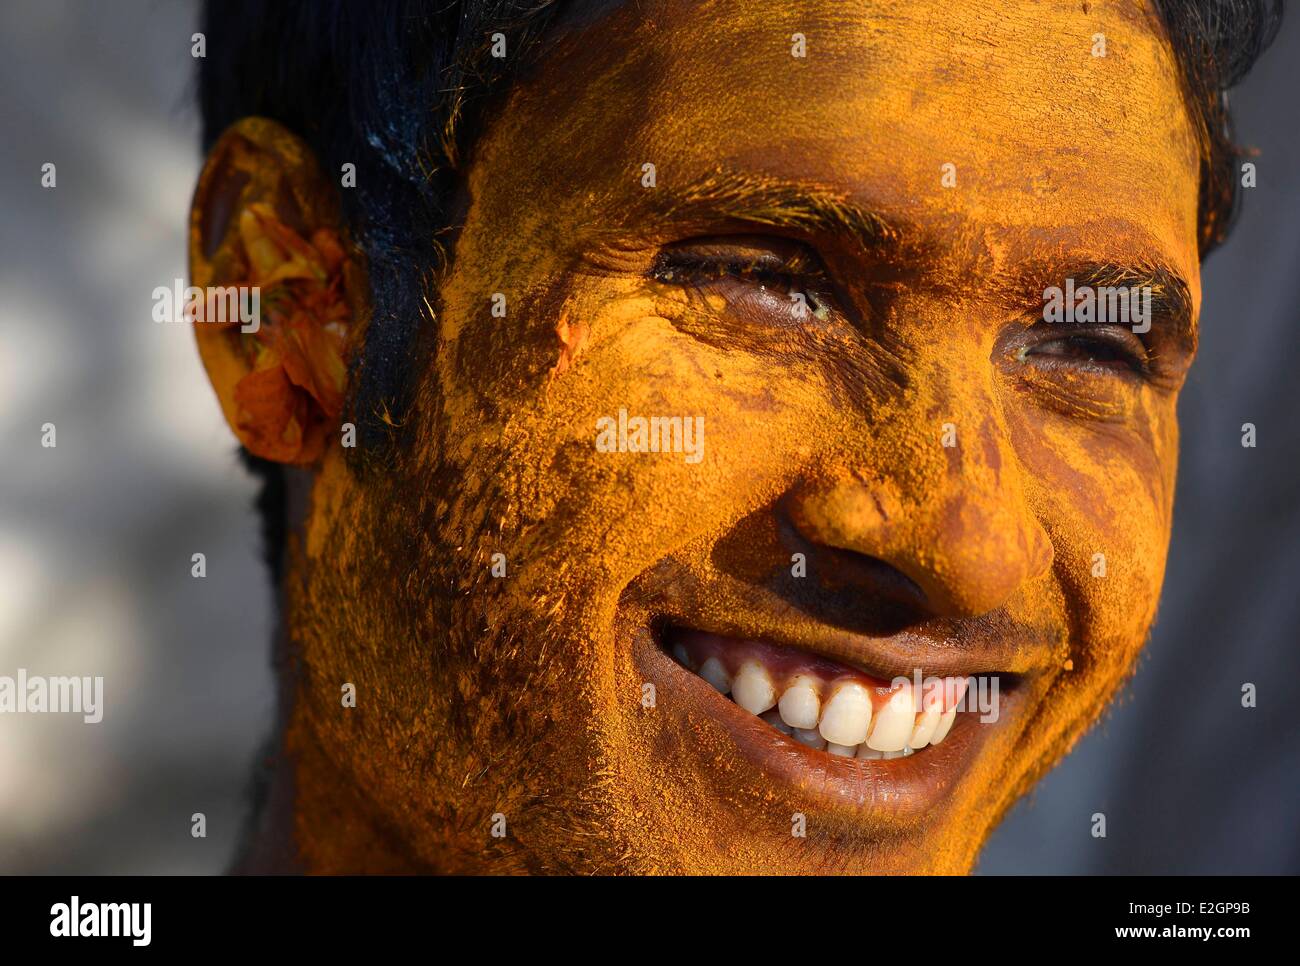 India Uttar Pradesh State Mathura a young man makes up with coloured powder on his face during Holi festival celebrations Stock Photo